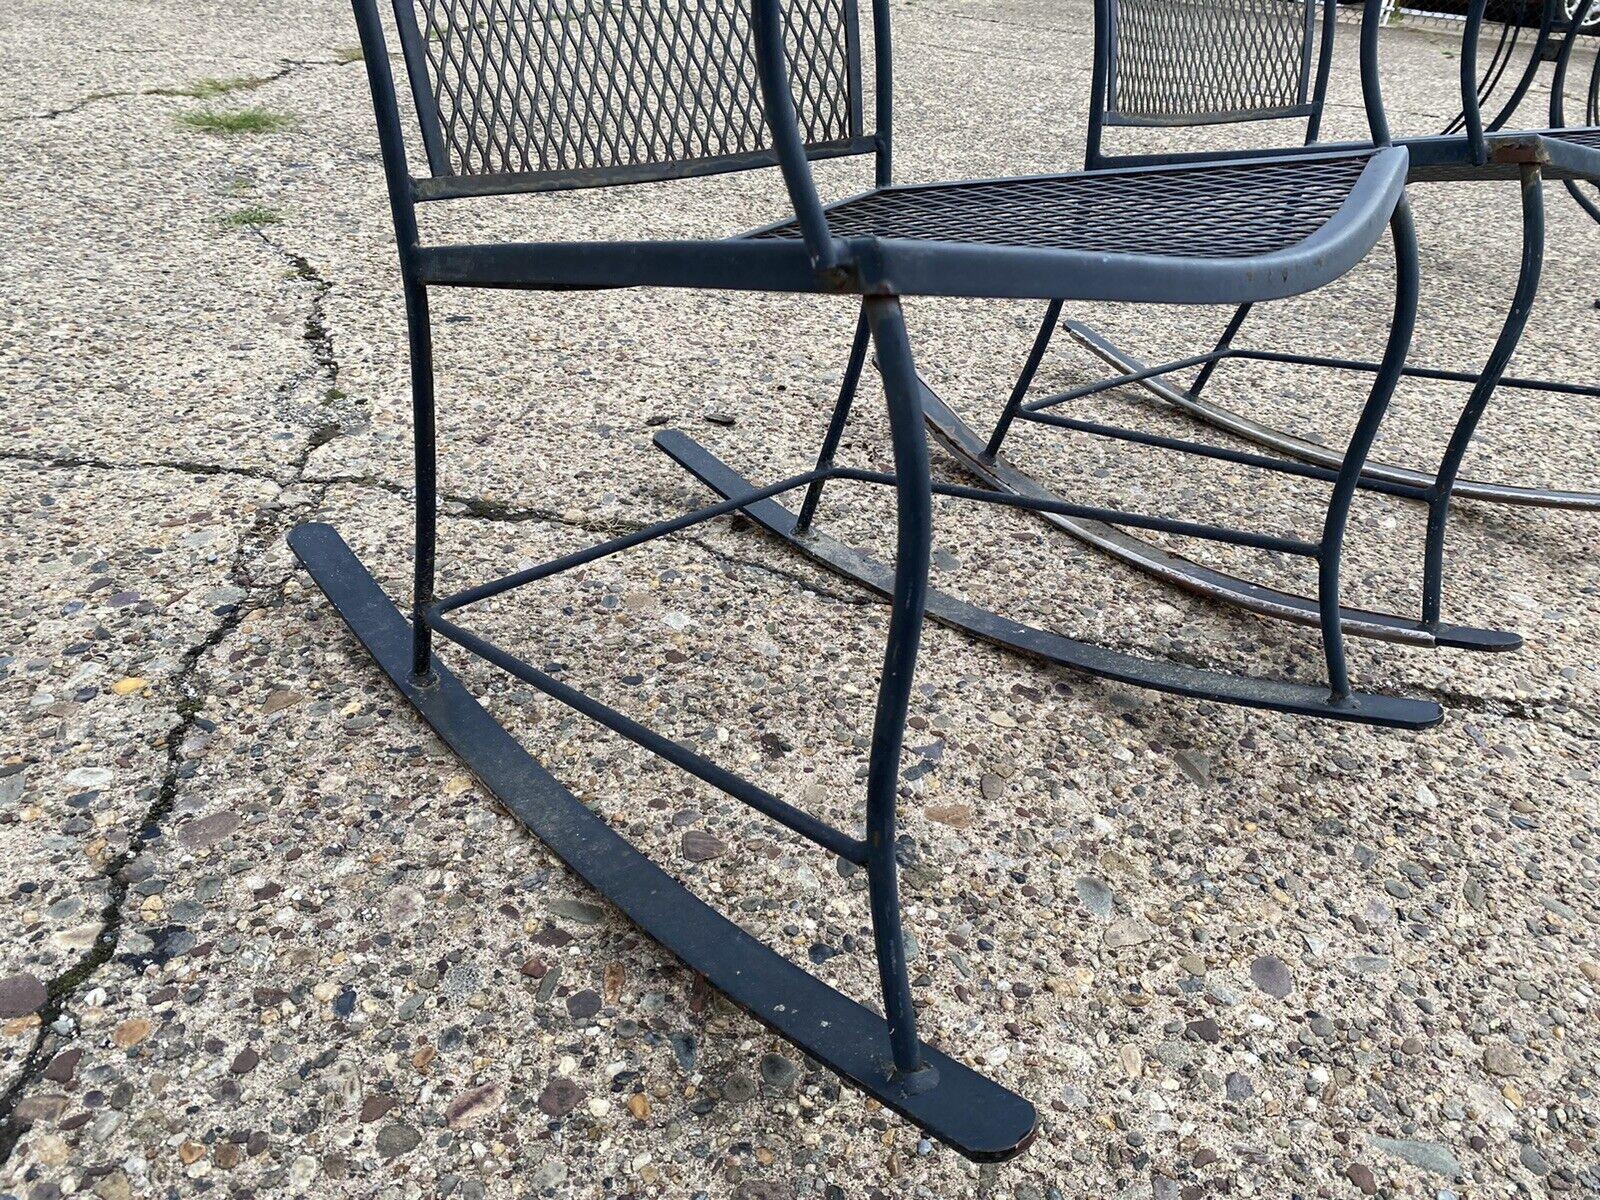 20th Century Vintage Wrought Iron Victorian Style Garden Patio Rocker Rocking Chairs - a Pair